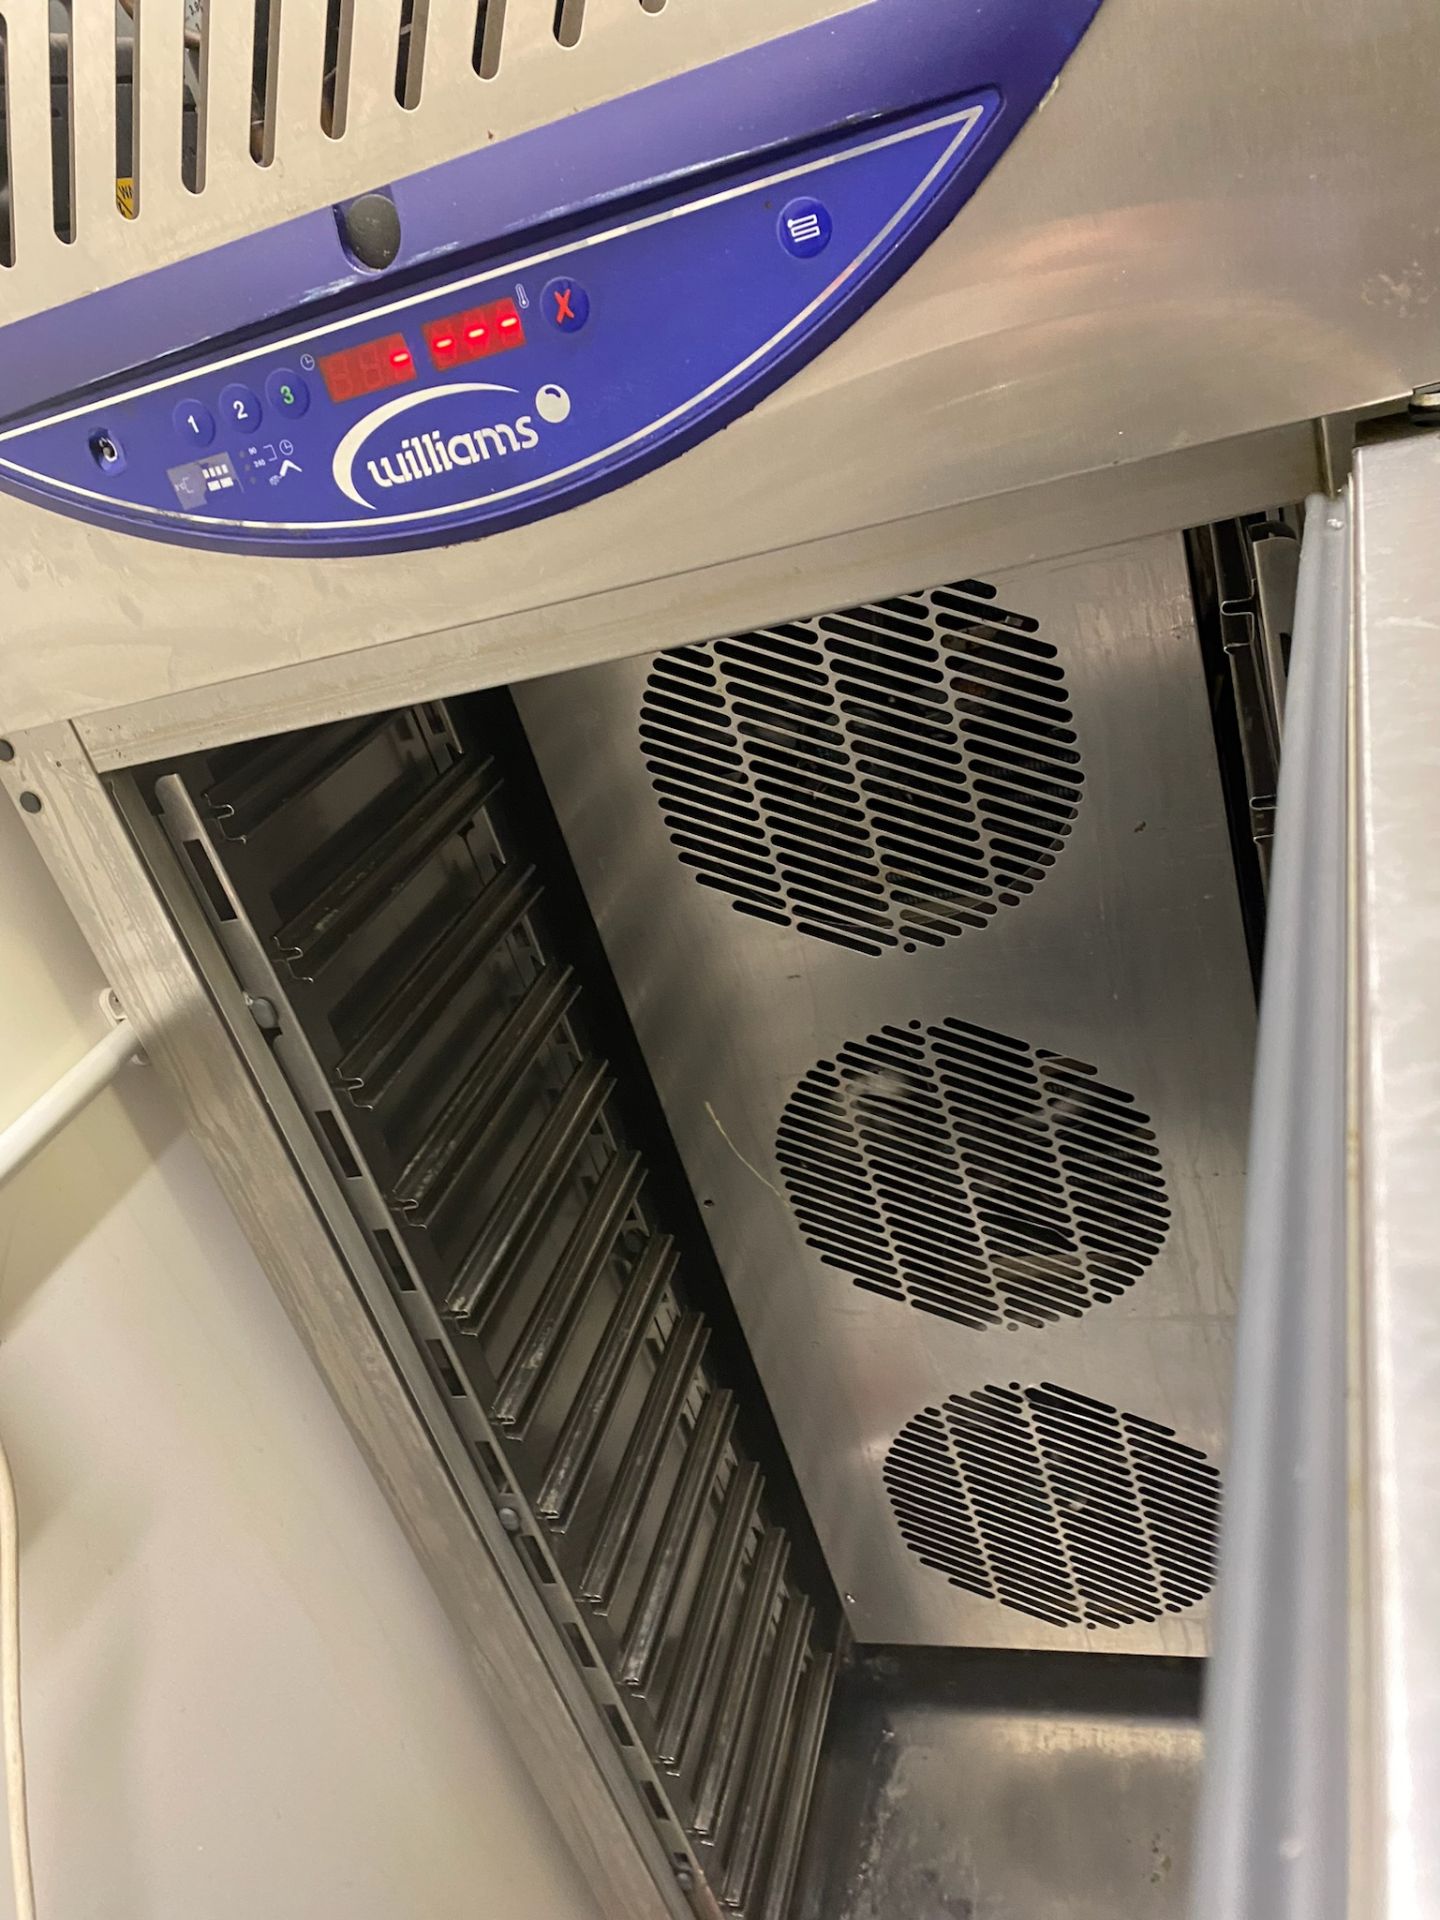 1 x Williams Stainless Steel Reach In Blast Chiller - Ref: BGC011 - CL807 - Covent Garden, - Image 2 of 2